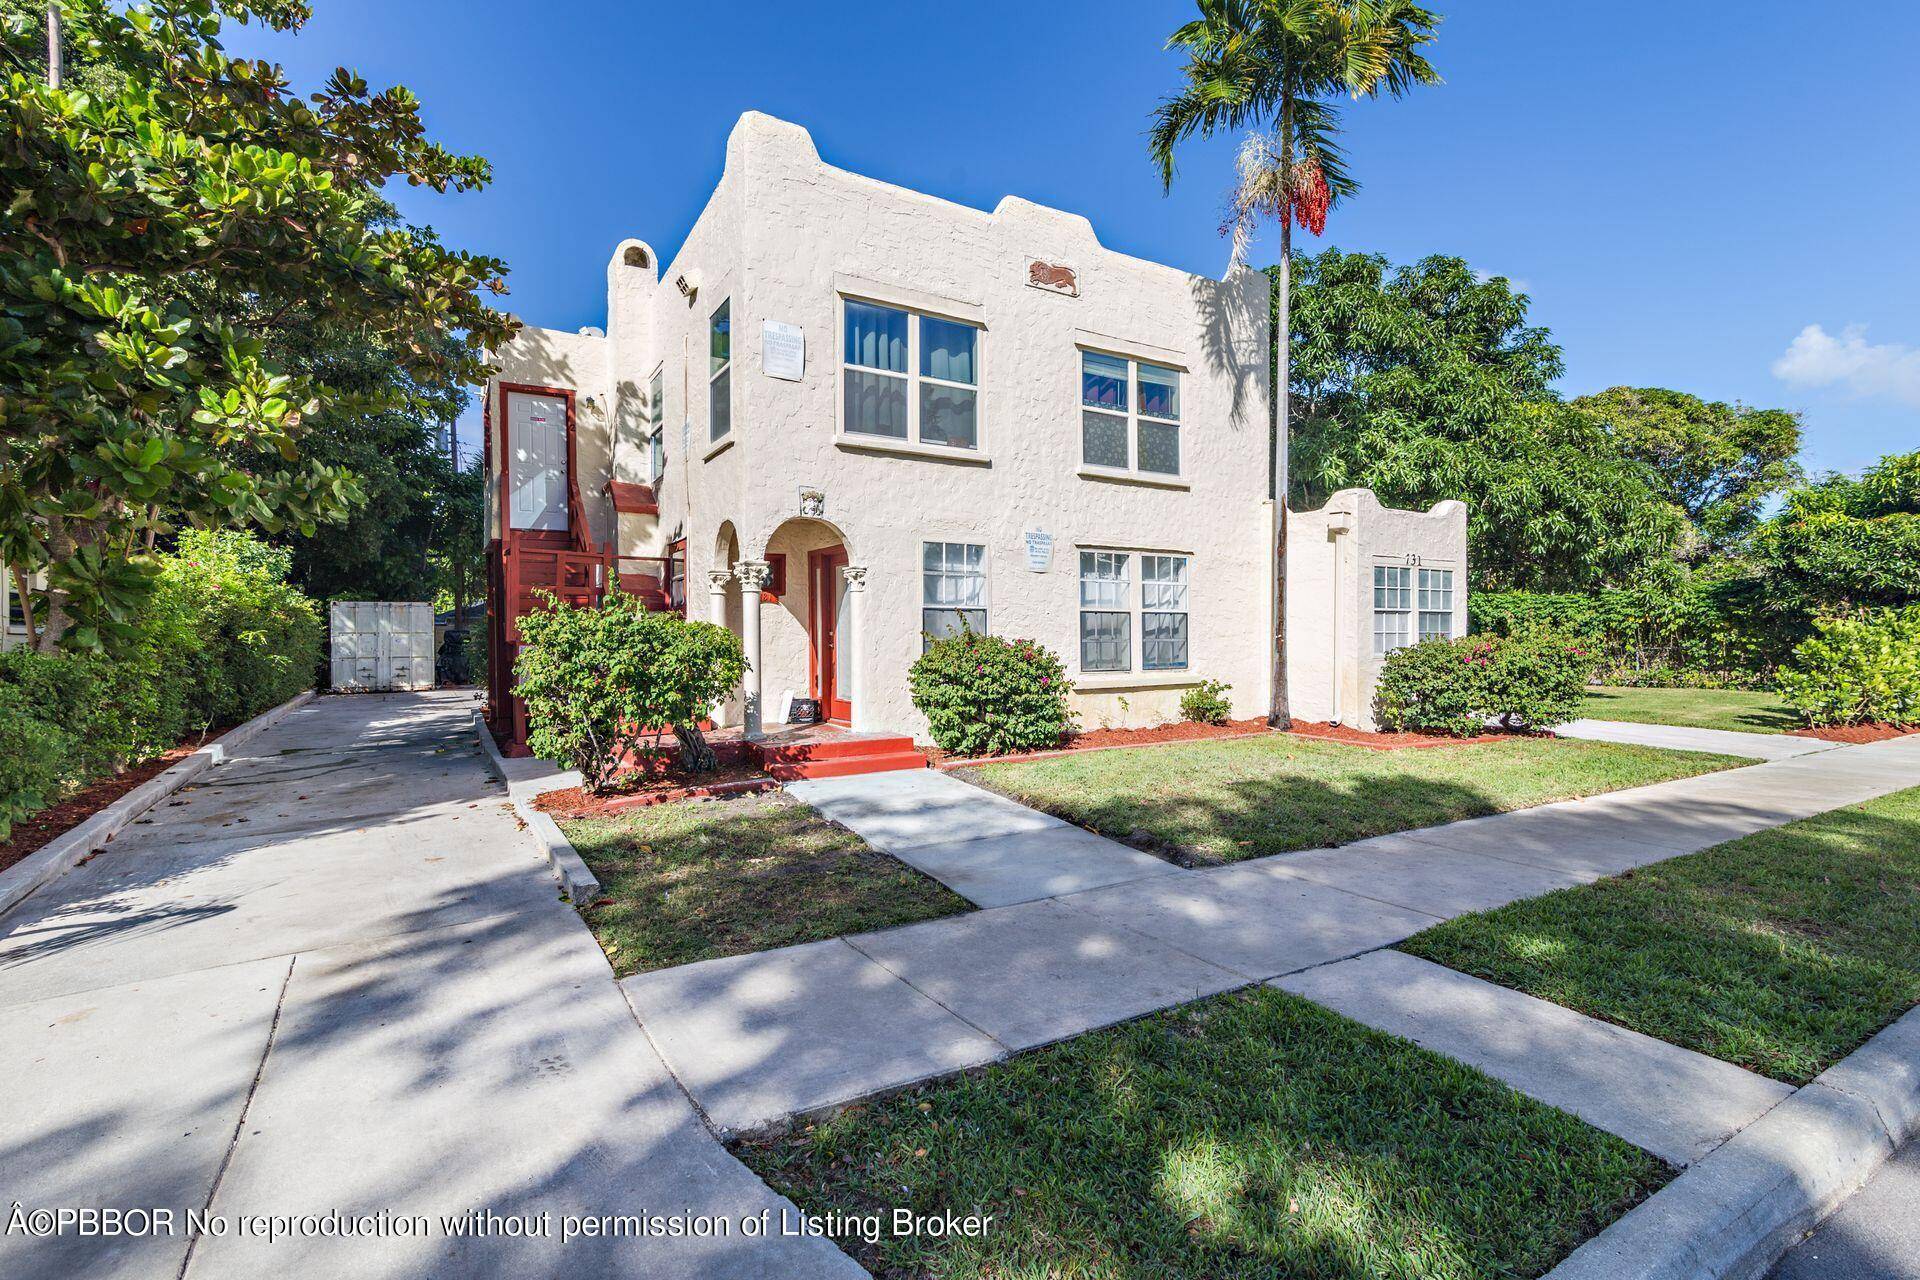 Attention Investors ! This is an excellent opportunity to invest in a well maintained multifamily property in the thriving Palm Beach County market.